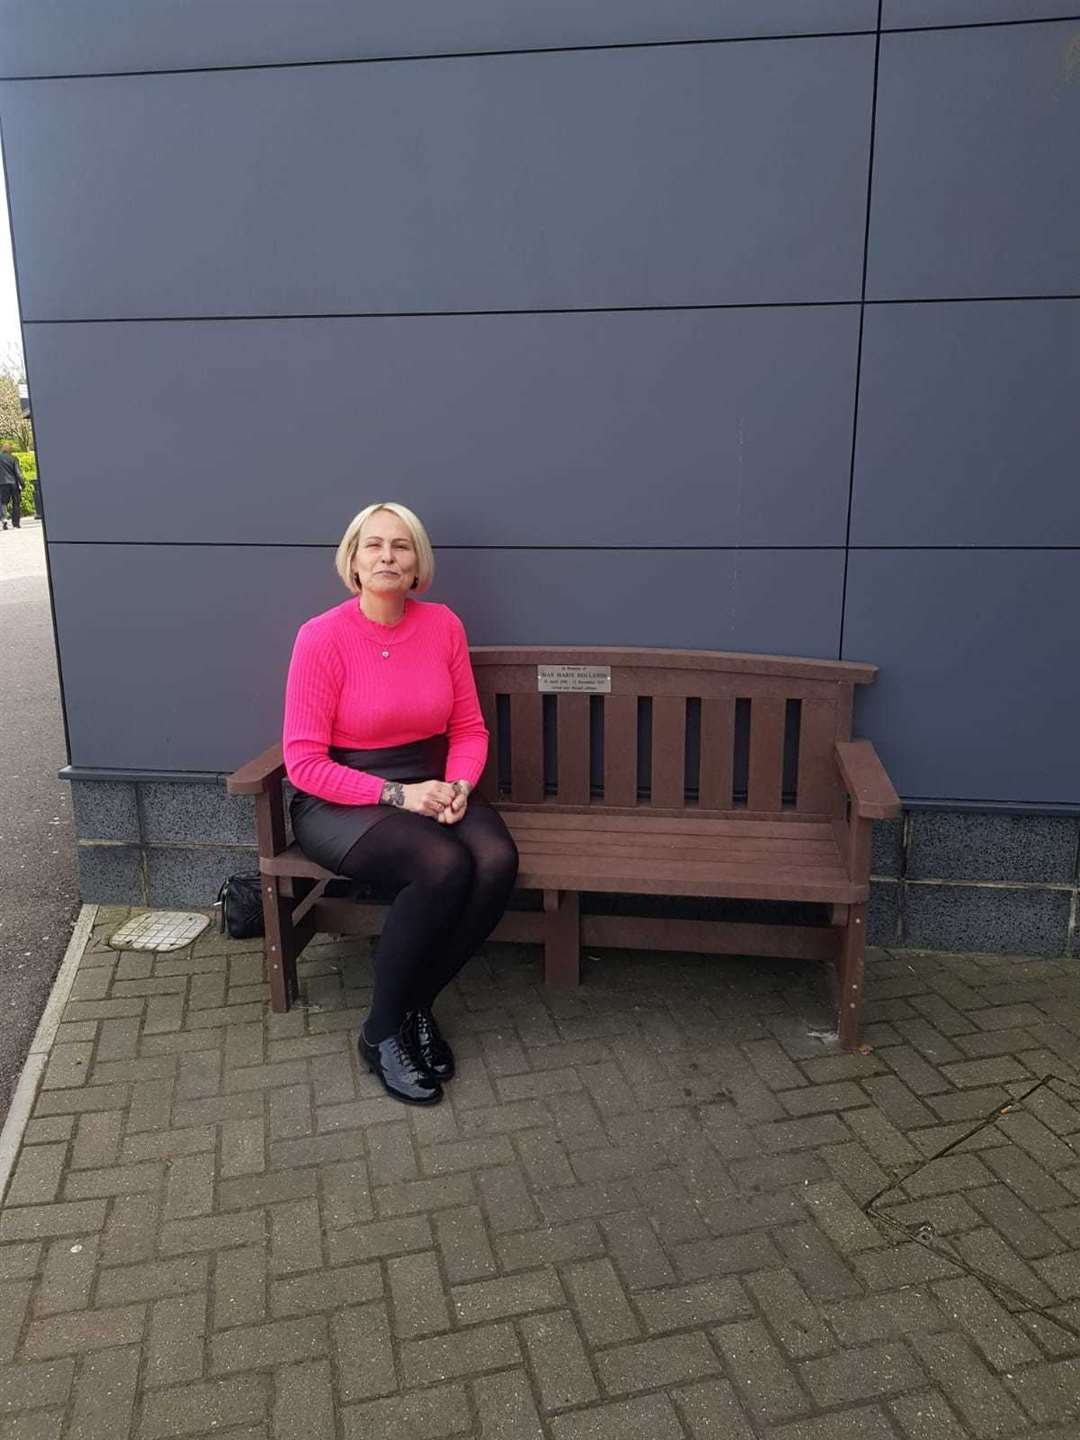 Miss Smith visited the bench earlier today. Picture: Nicola Smith